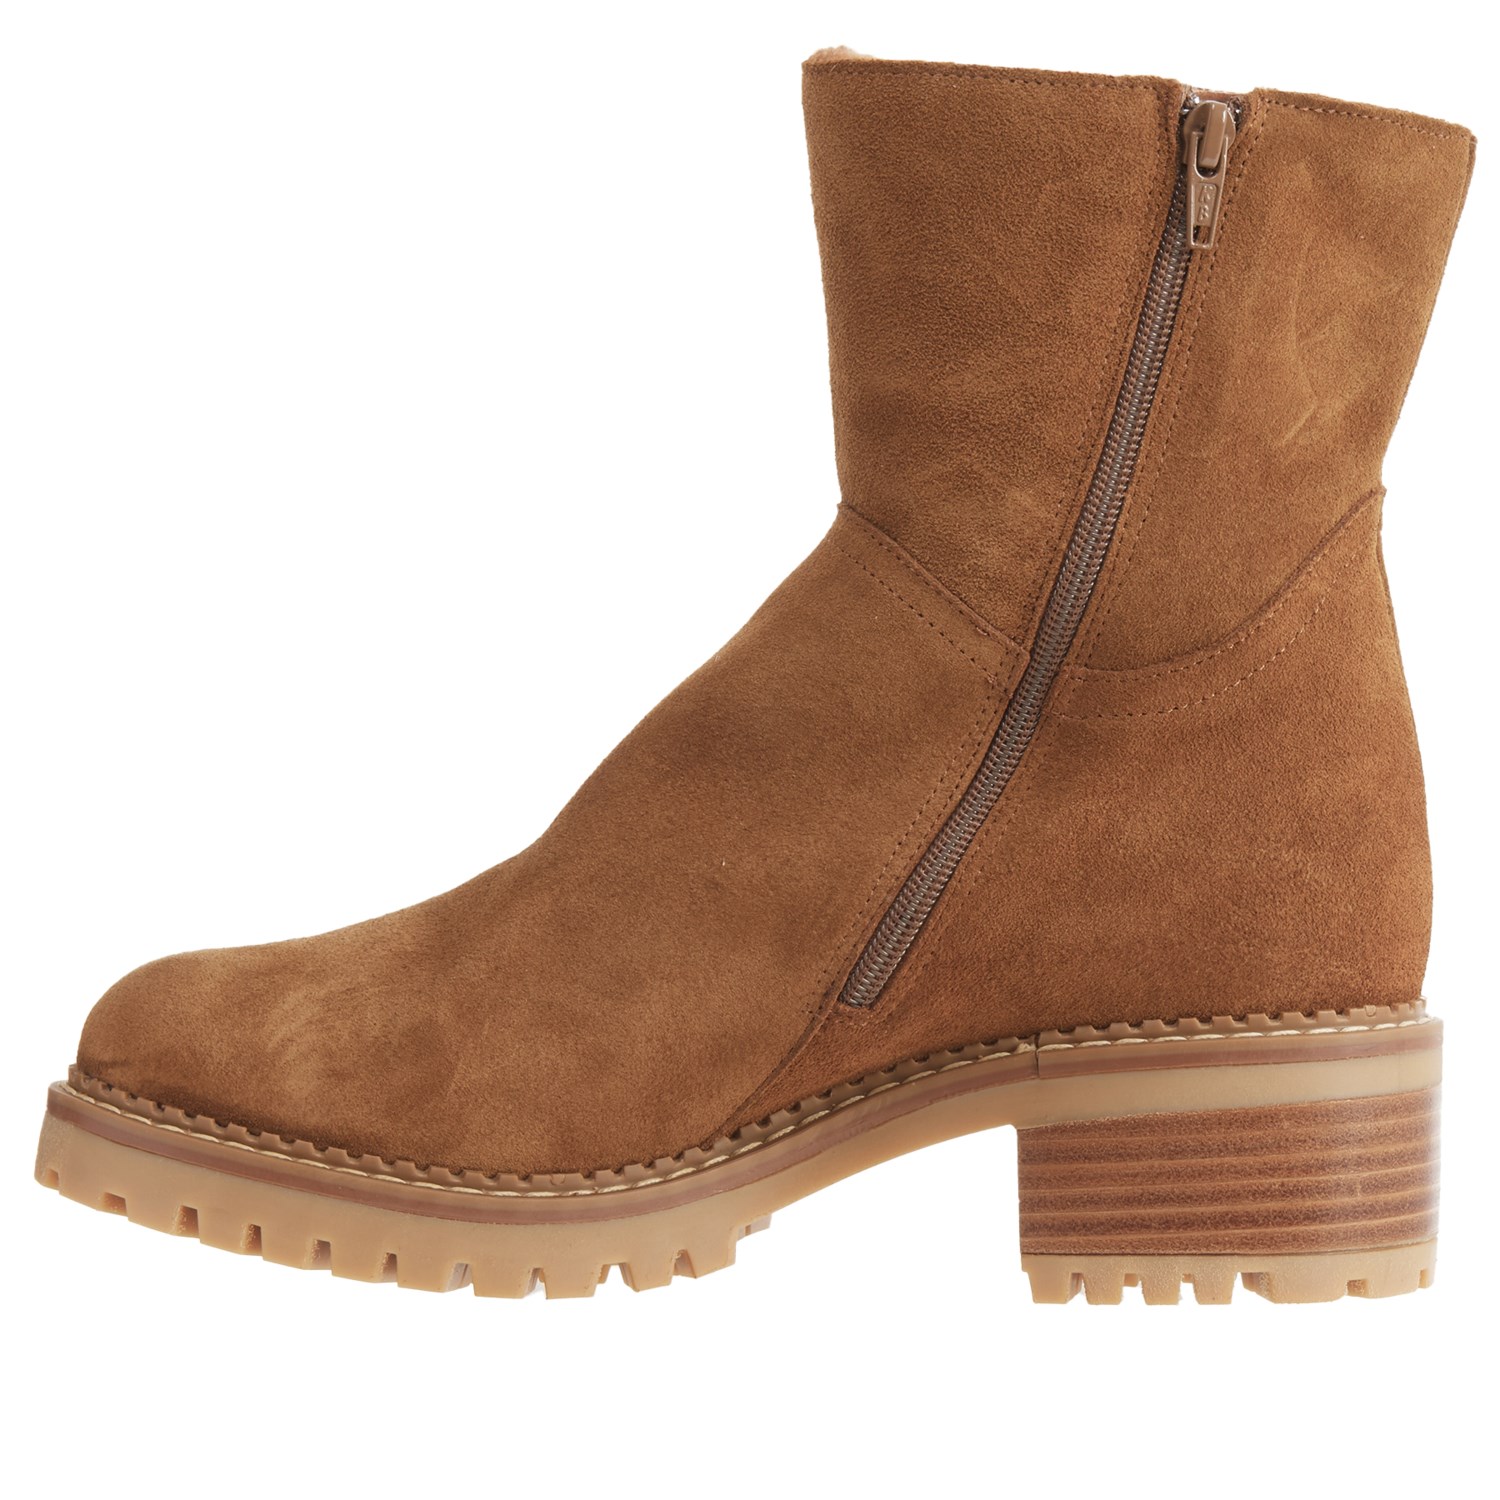 BERTUCHI Made in Spain Zip-Up Boots (For Women) - Save 40%